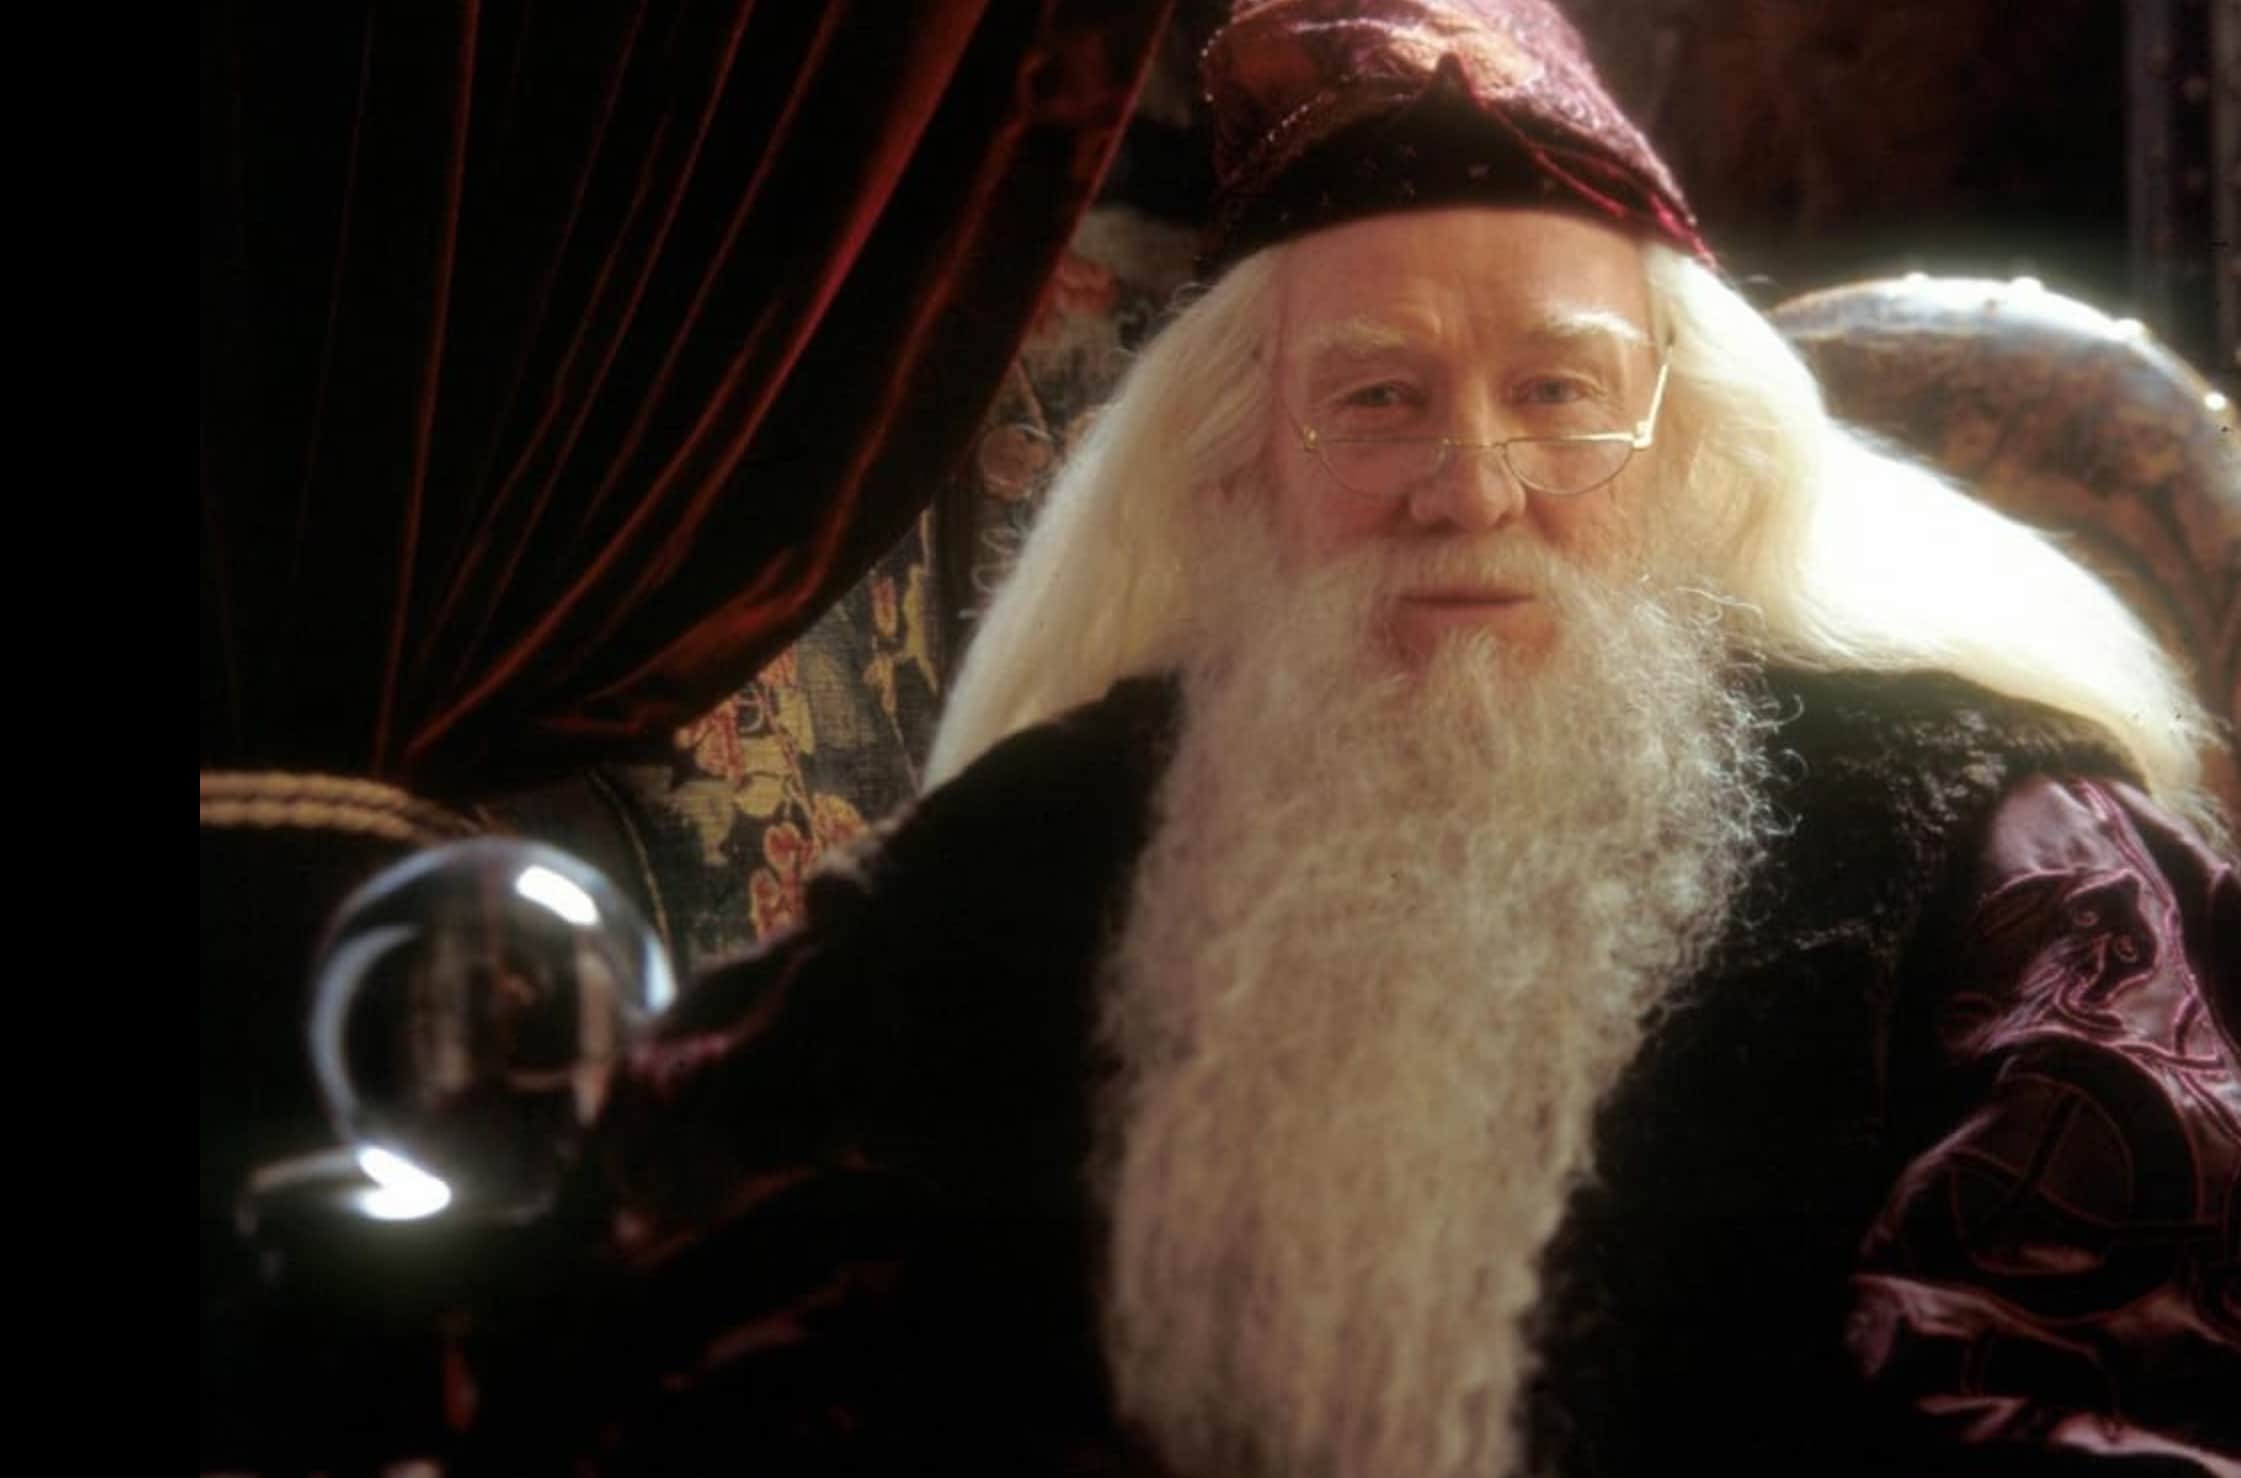 <ul> <li><strong>Who said it:</strong> Albus Dumbledore</li> <li><strong>Played by:</strong> Richard Harris</li> <li><strong>Movie:</strong> Harry Potter and the Chamber of Secrets (2002)</li> </ul> <p>Many of the best Harry Potter quotes about courage come from Professor Albus Dumbledore, who was played by Richard Harris in the first two movies. Dumbledore spoke this line to Harry after asking him why the sorting hat placed him in Gryffindor instead of Slytherin, to which Harry responded, "Because I asked it to."</p>